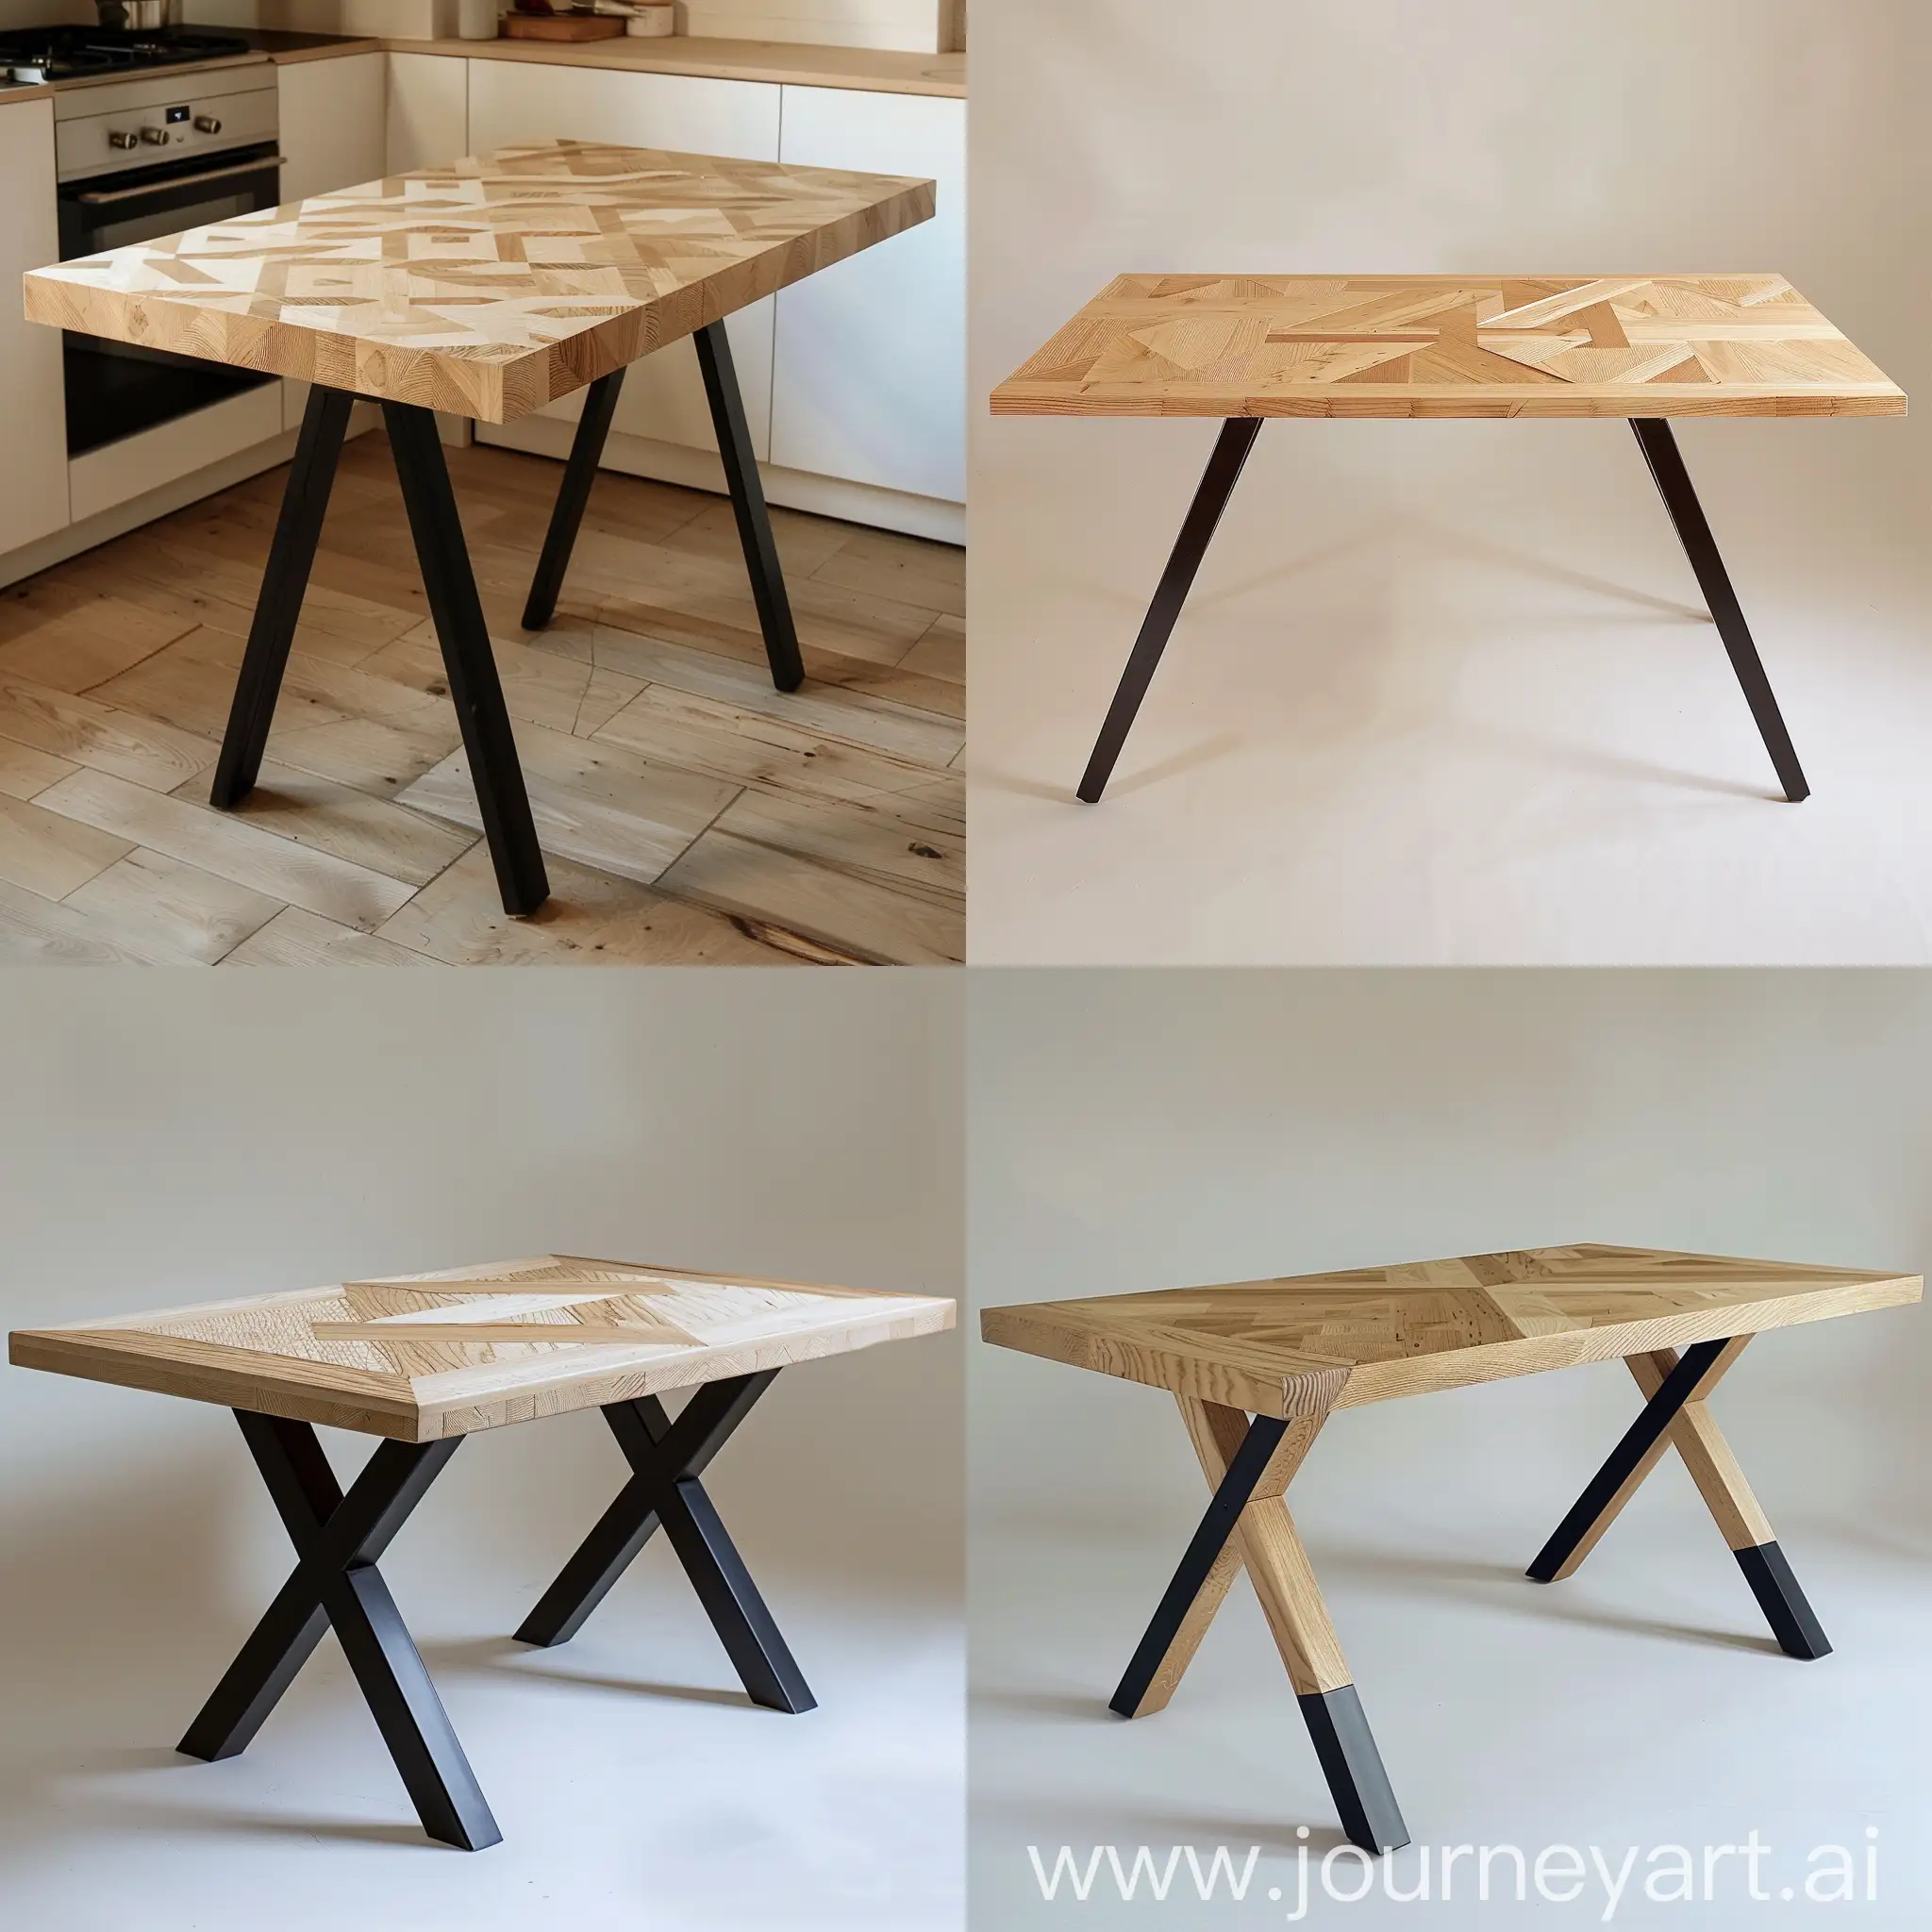 Minimalist-Wooden-Table-with-ZPattern-Design-on-Creamy-Background